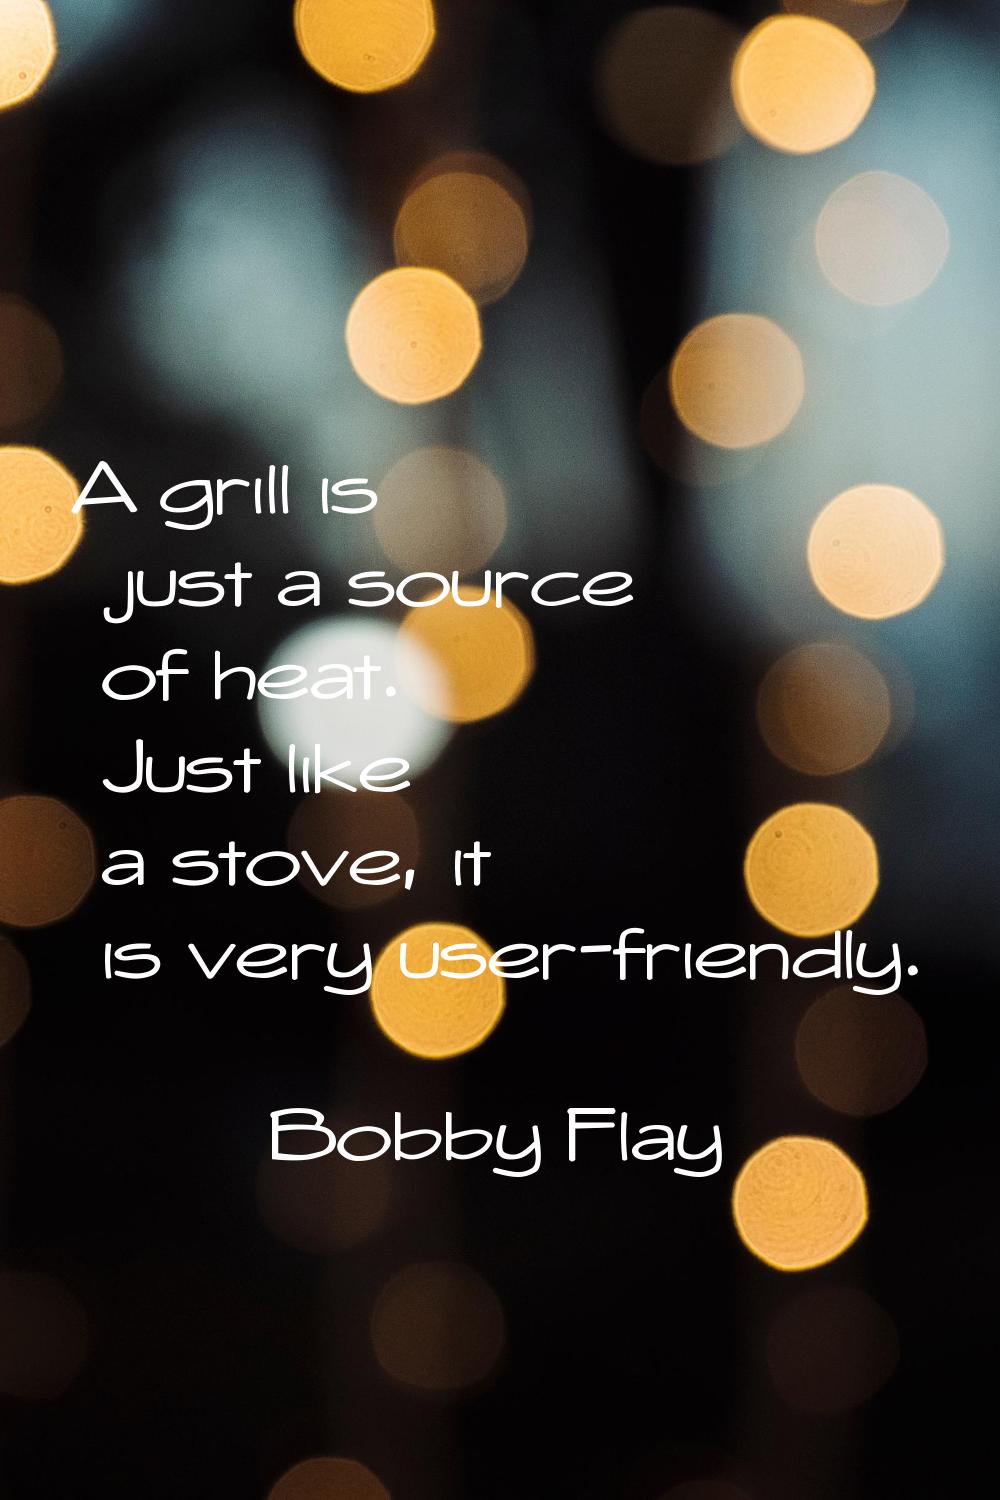 A grill is just a source of heat. Just like a stove, it is very user-friendly.